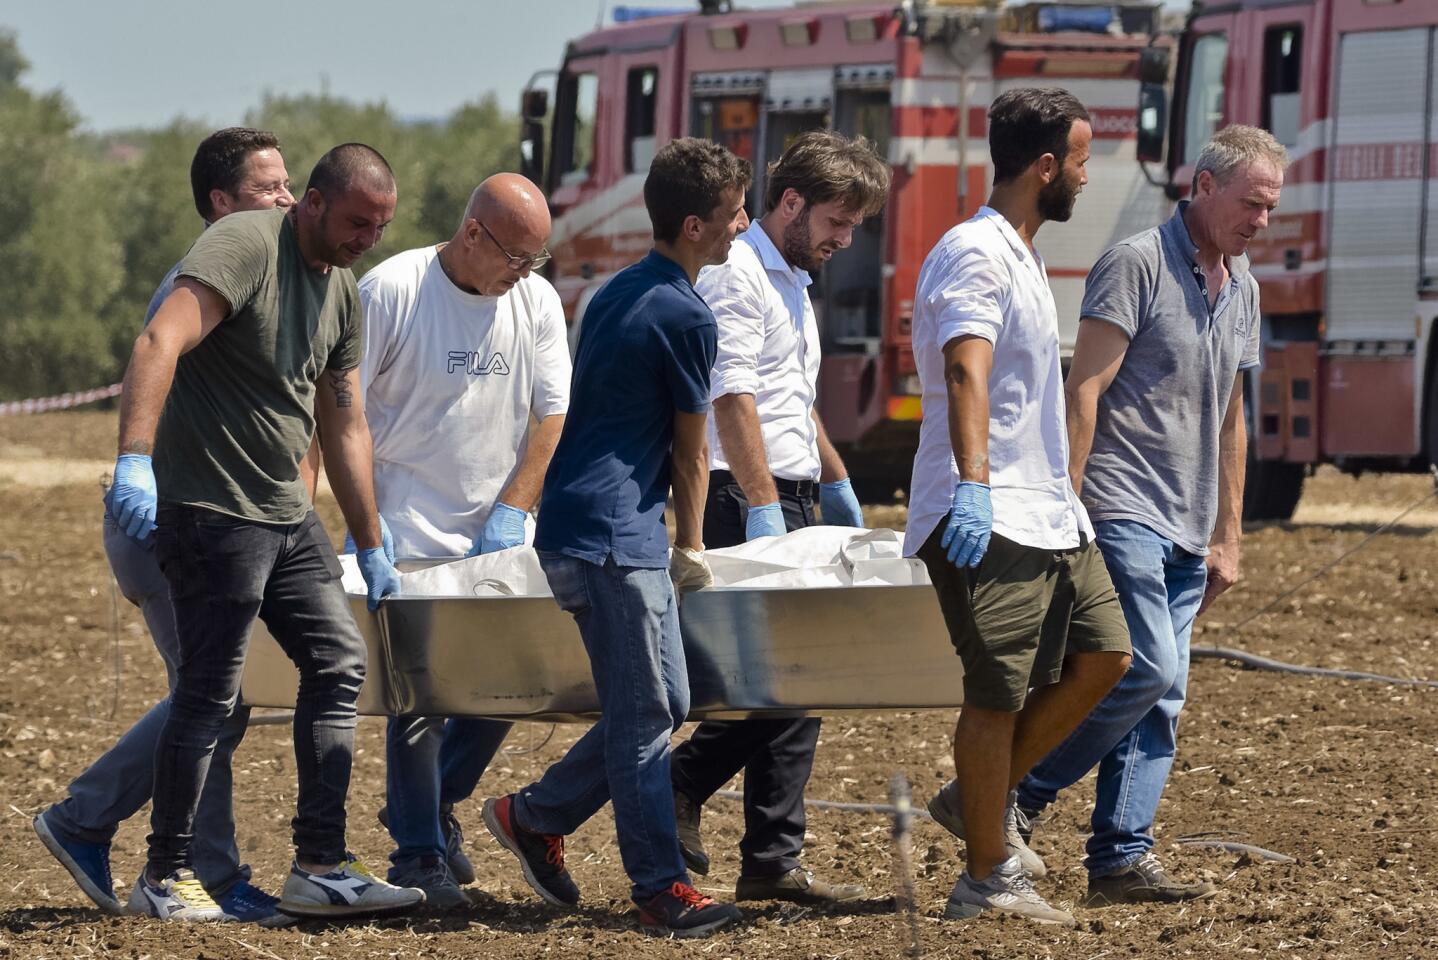 Rescuers carry a body they recovered from the scene of a train accident, after two commuter trains collided head-on near the town of Andria, in the southern region of Puglia, killing several people, Tuesday, July 12, 2016.